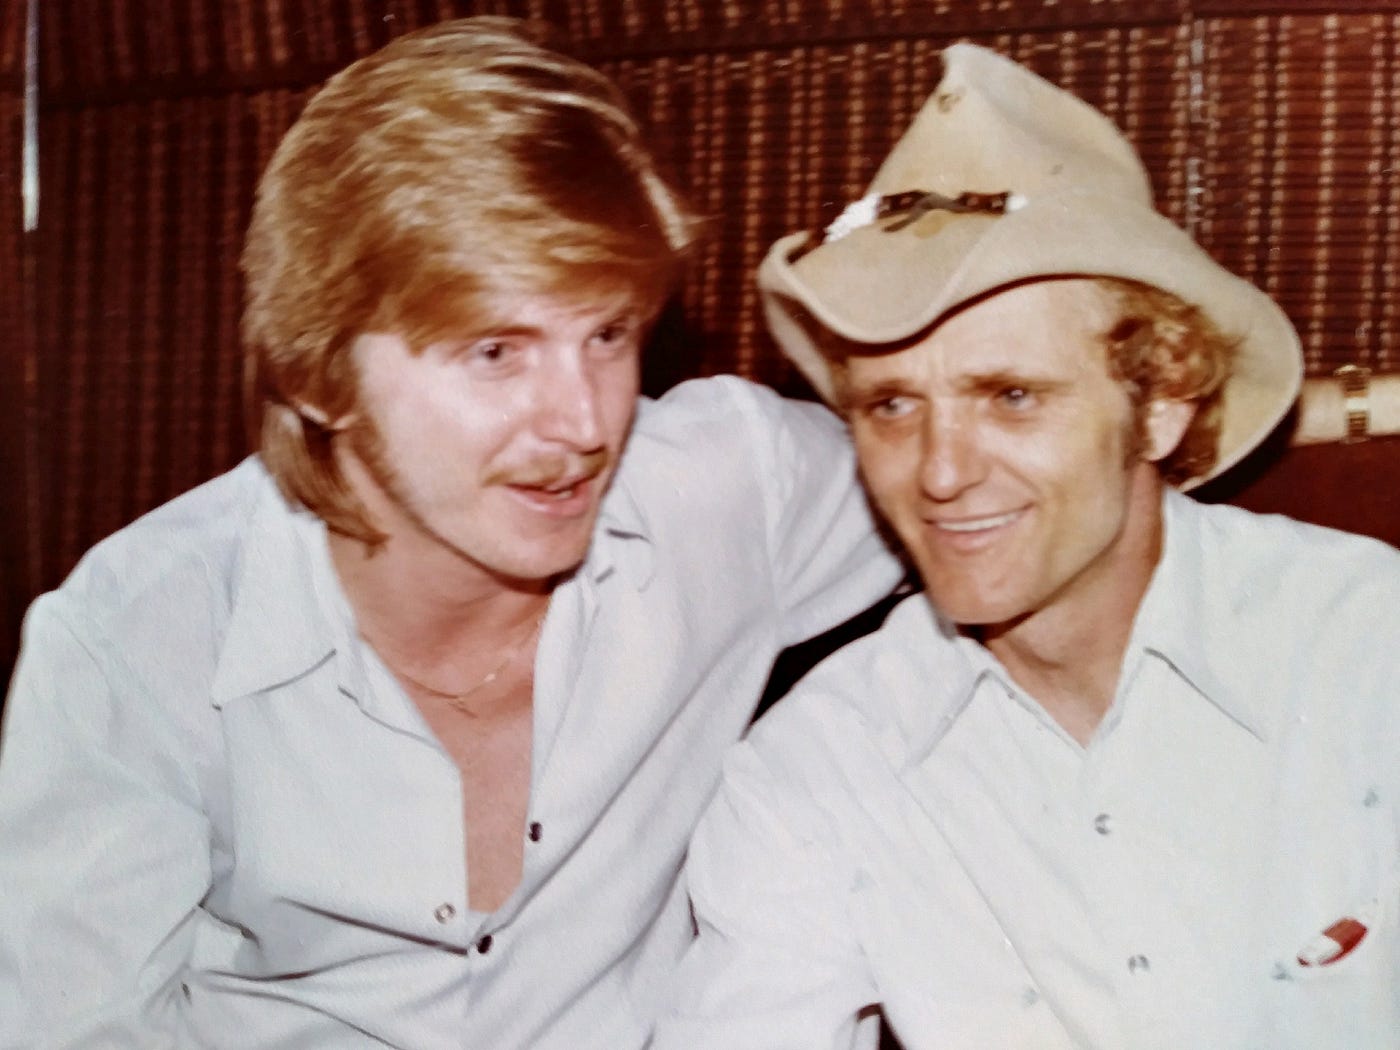 Nashville drummer Ric McClure remembers Jerry Reed Medium